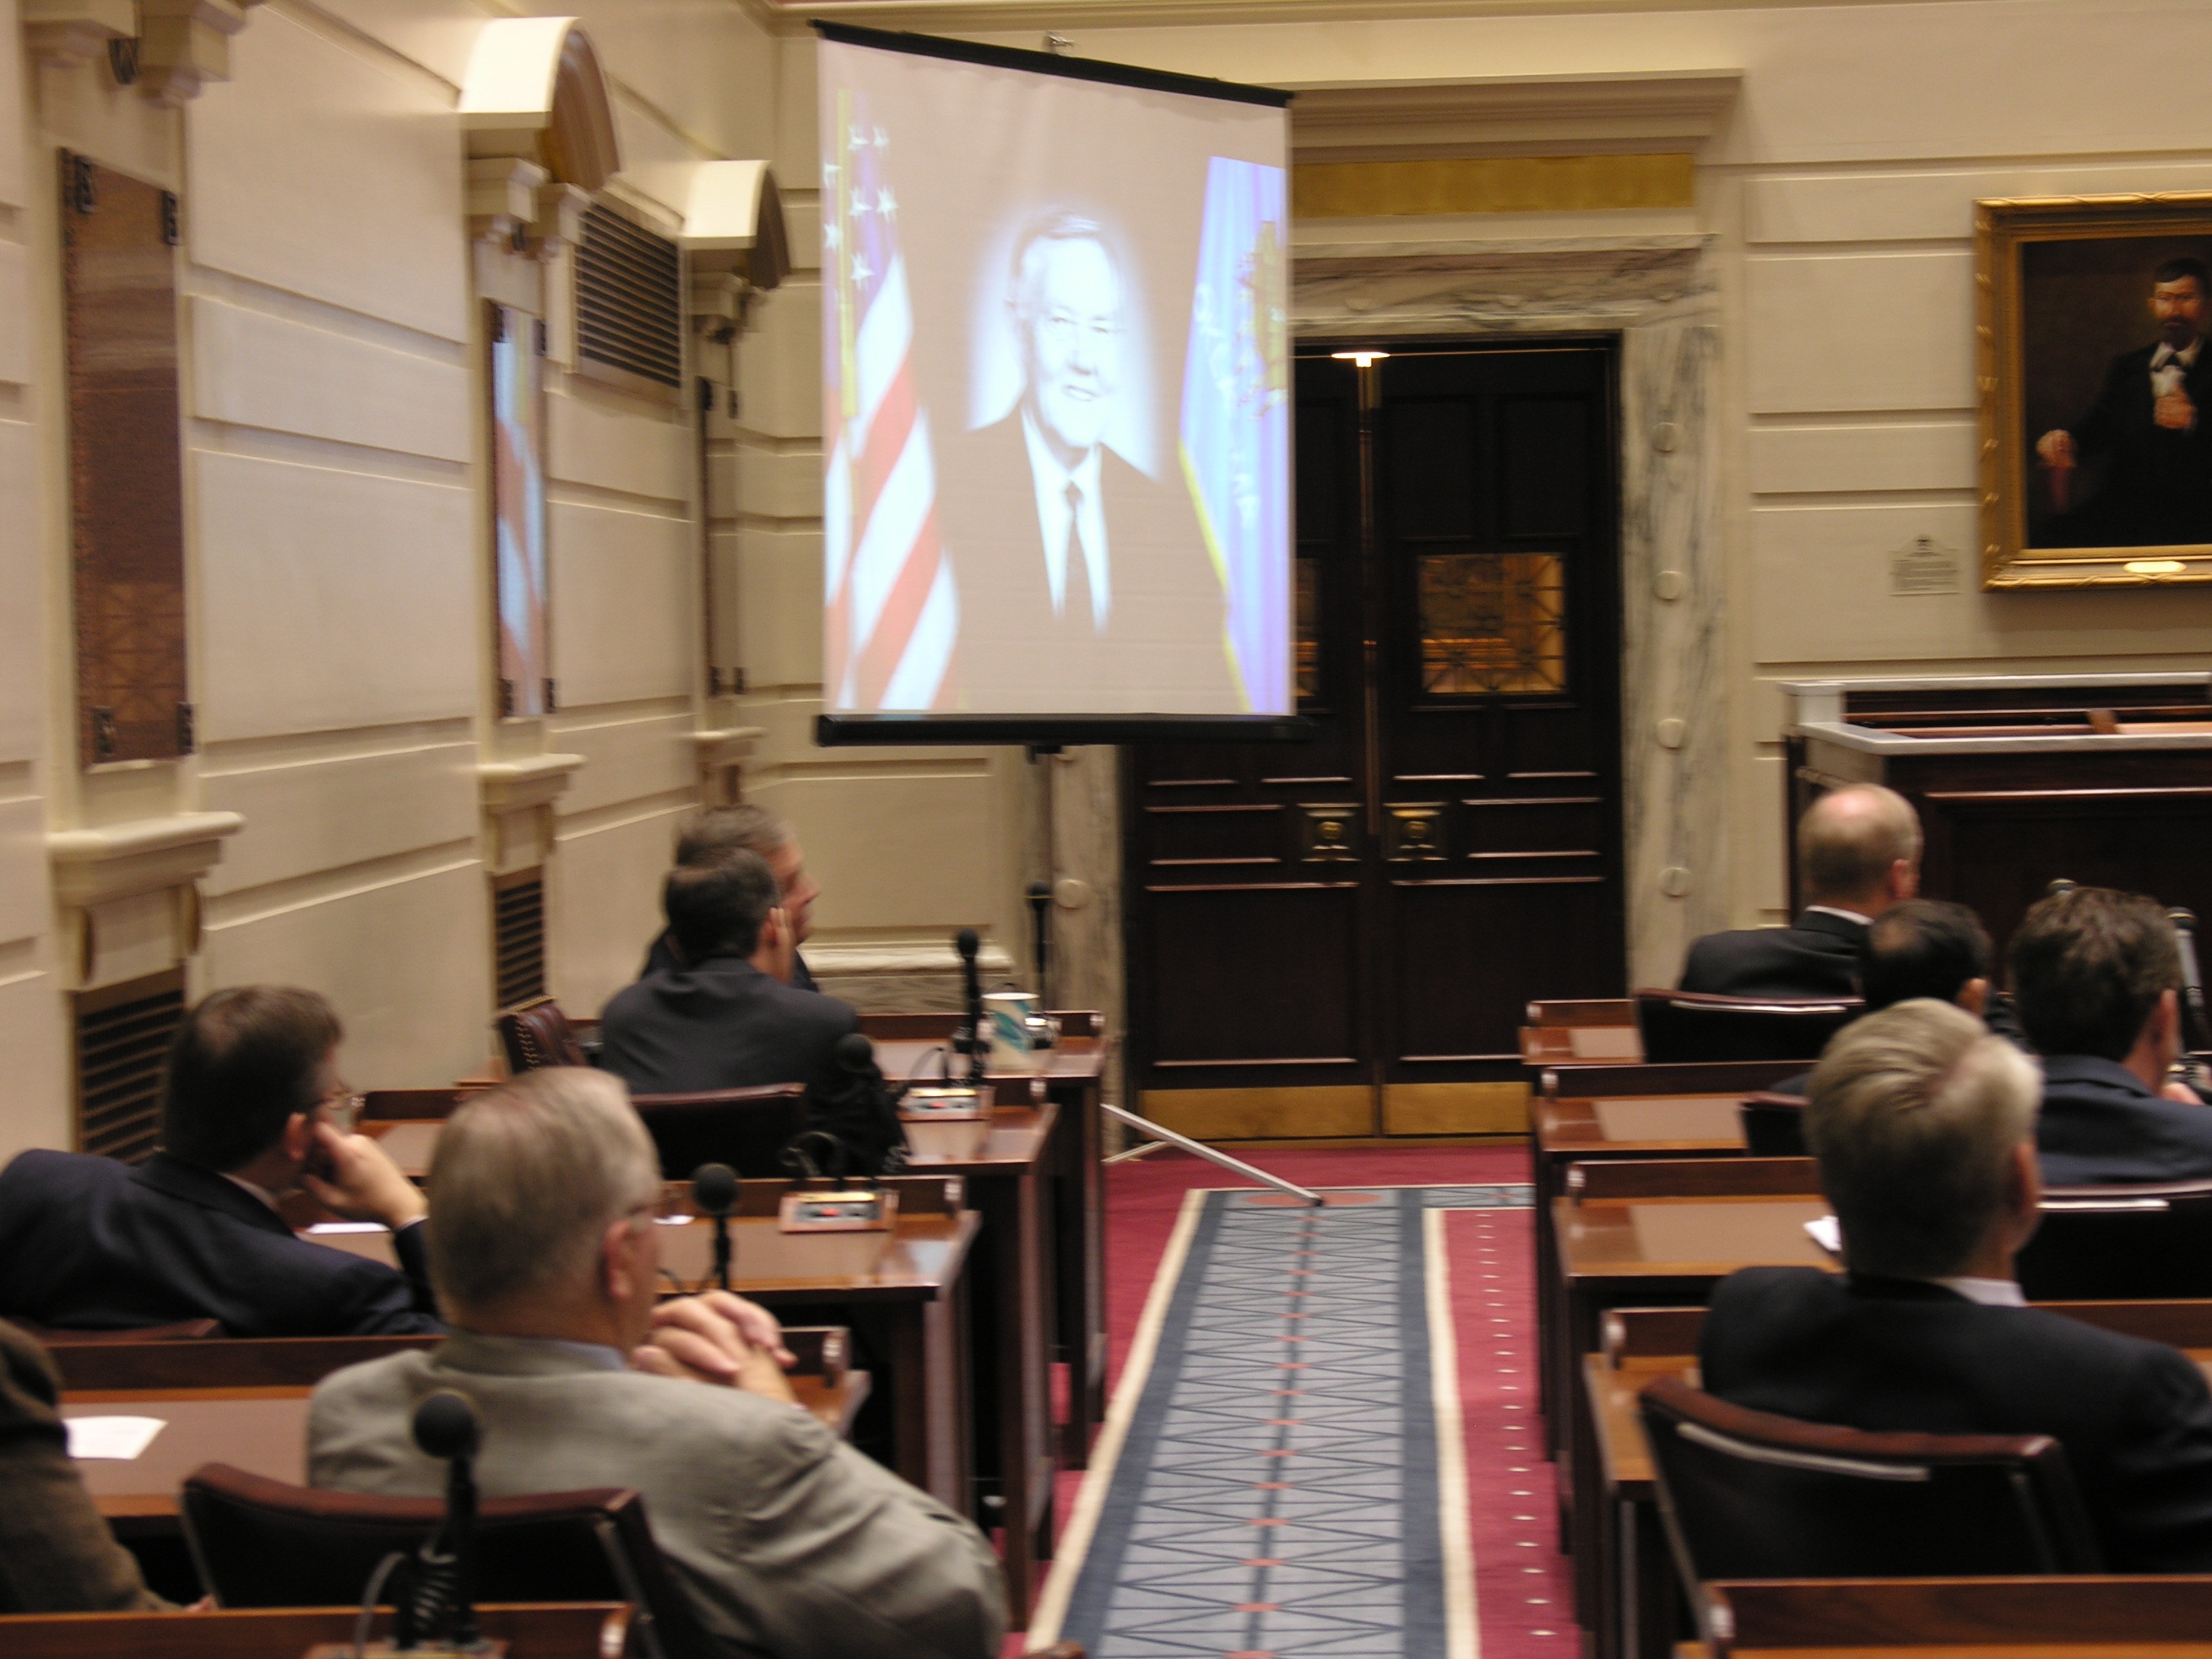 A photo of Senator Kerr is projected on a screen in the Senate Chamber during a Celebration of Life ceremony held in his honor Monday morning.